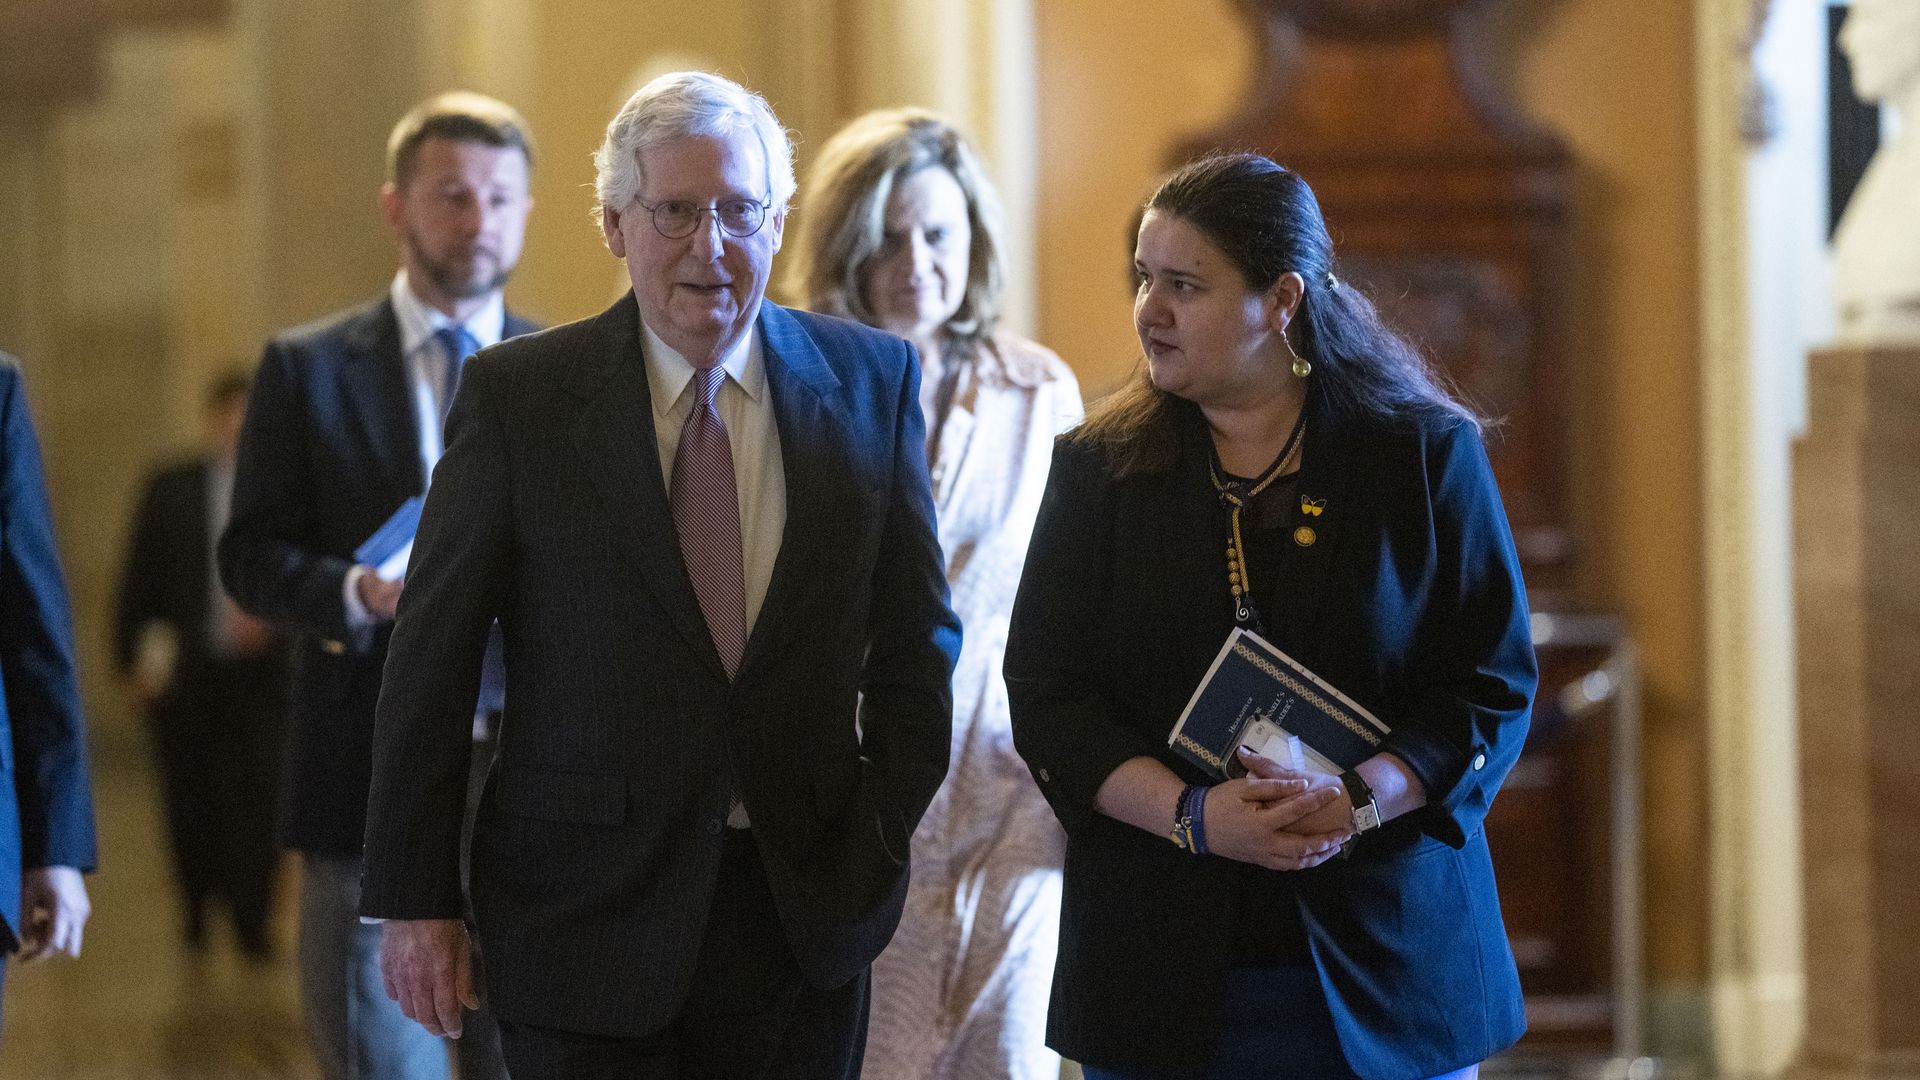 Ukraine's ambassador to the United States is seen walking with Senate Majority Leader Mitch McConnell.